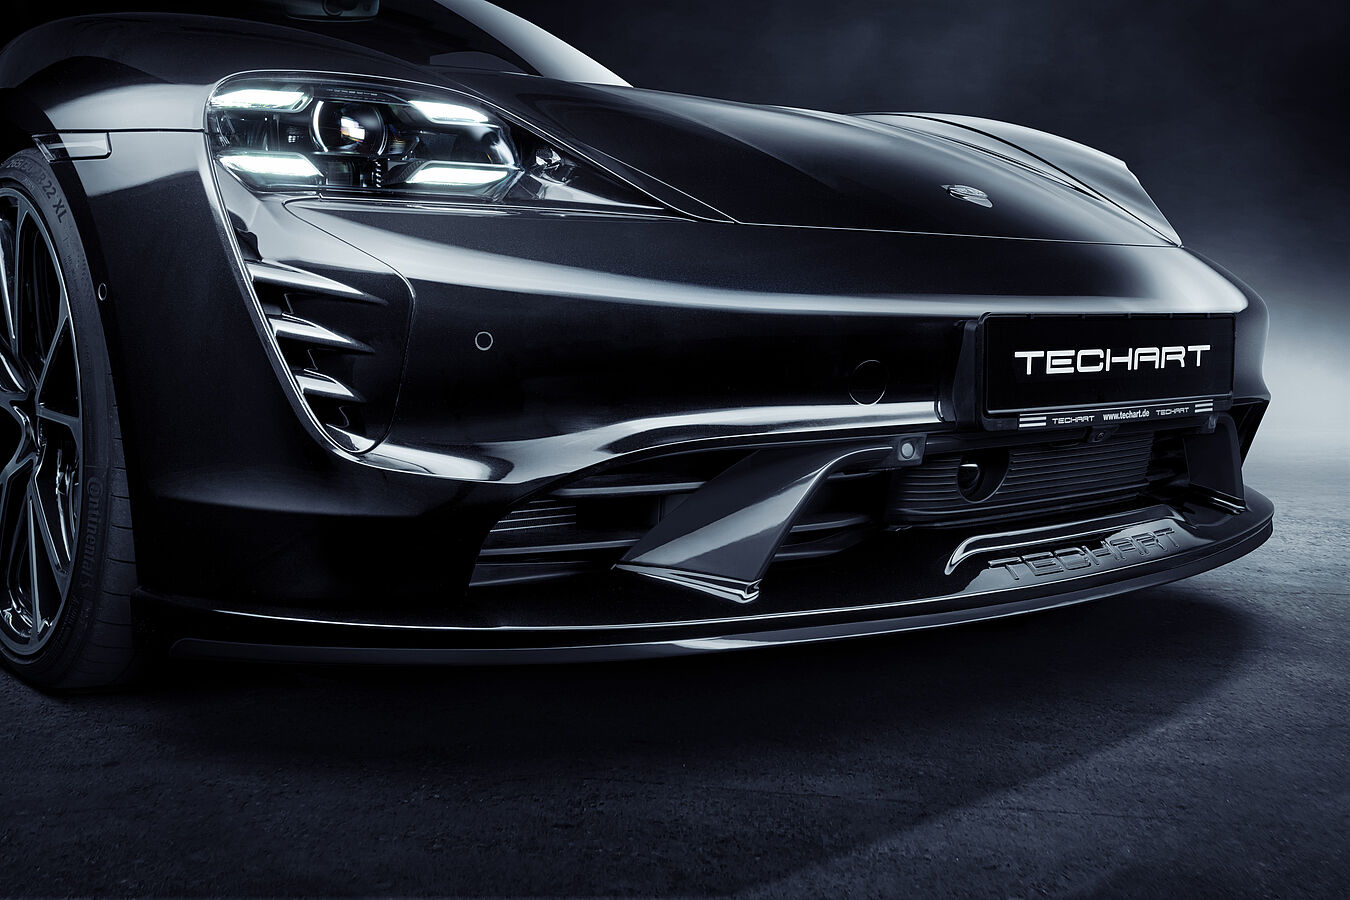 Check price and buy Techart body kit for Porsche Taycan